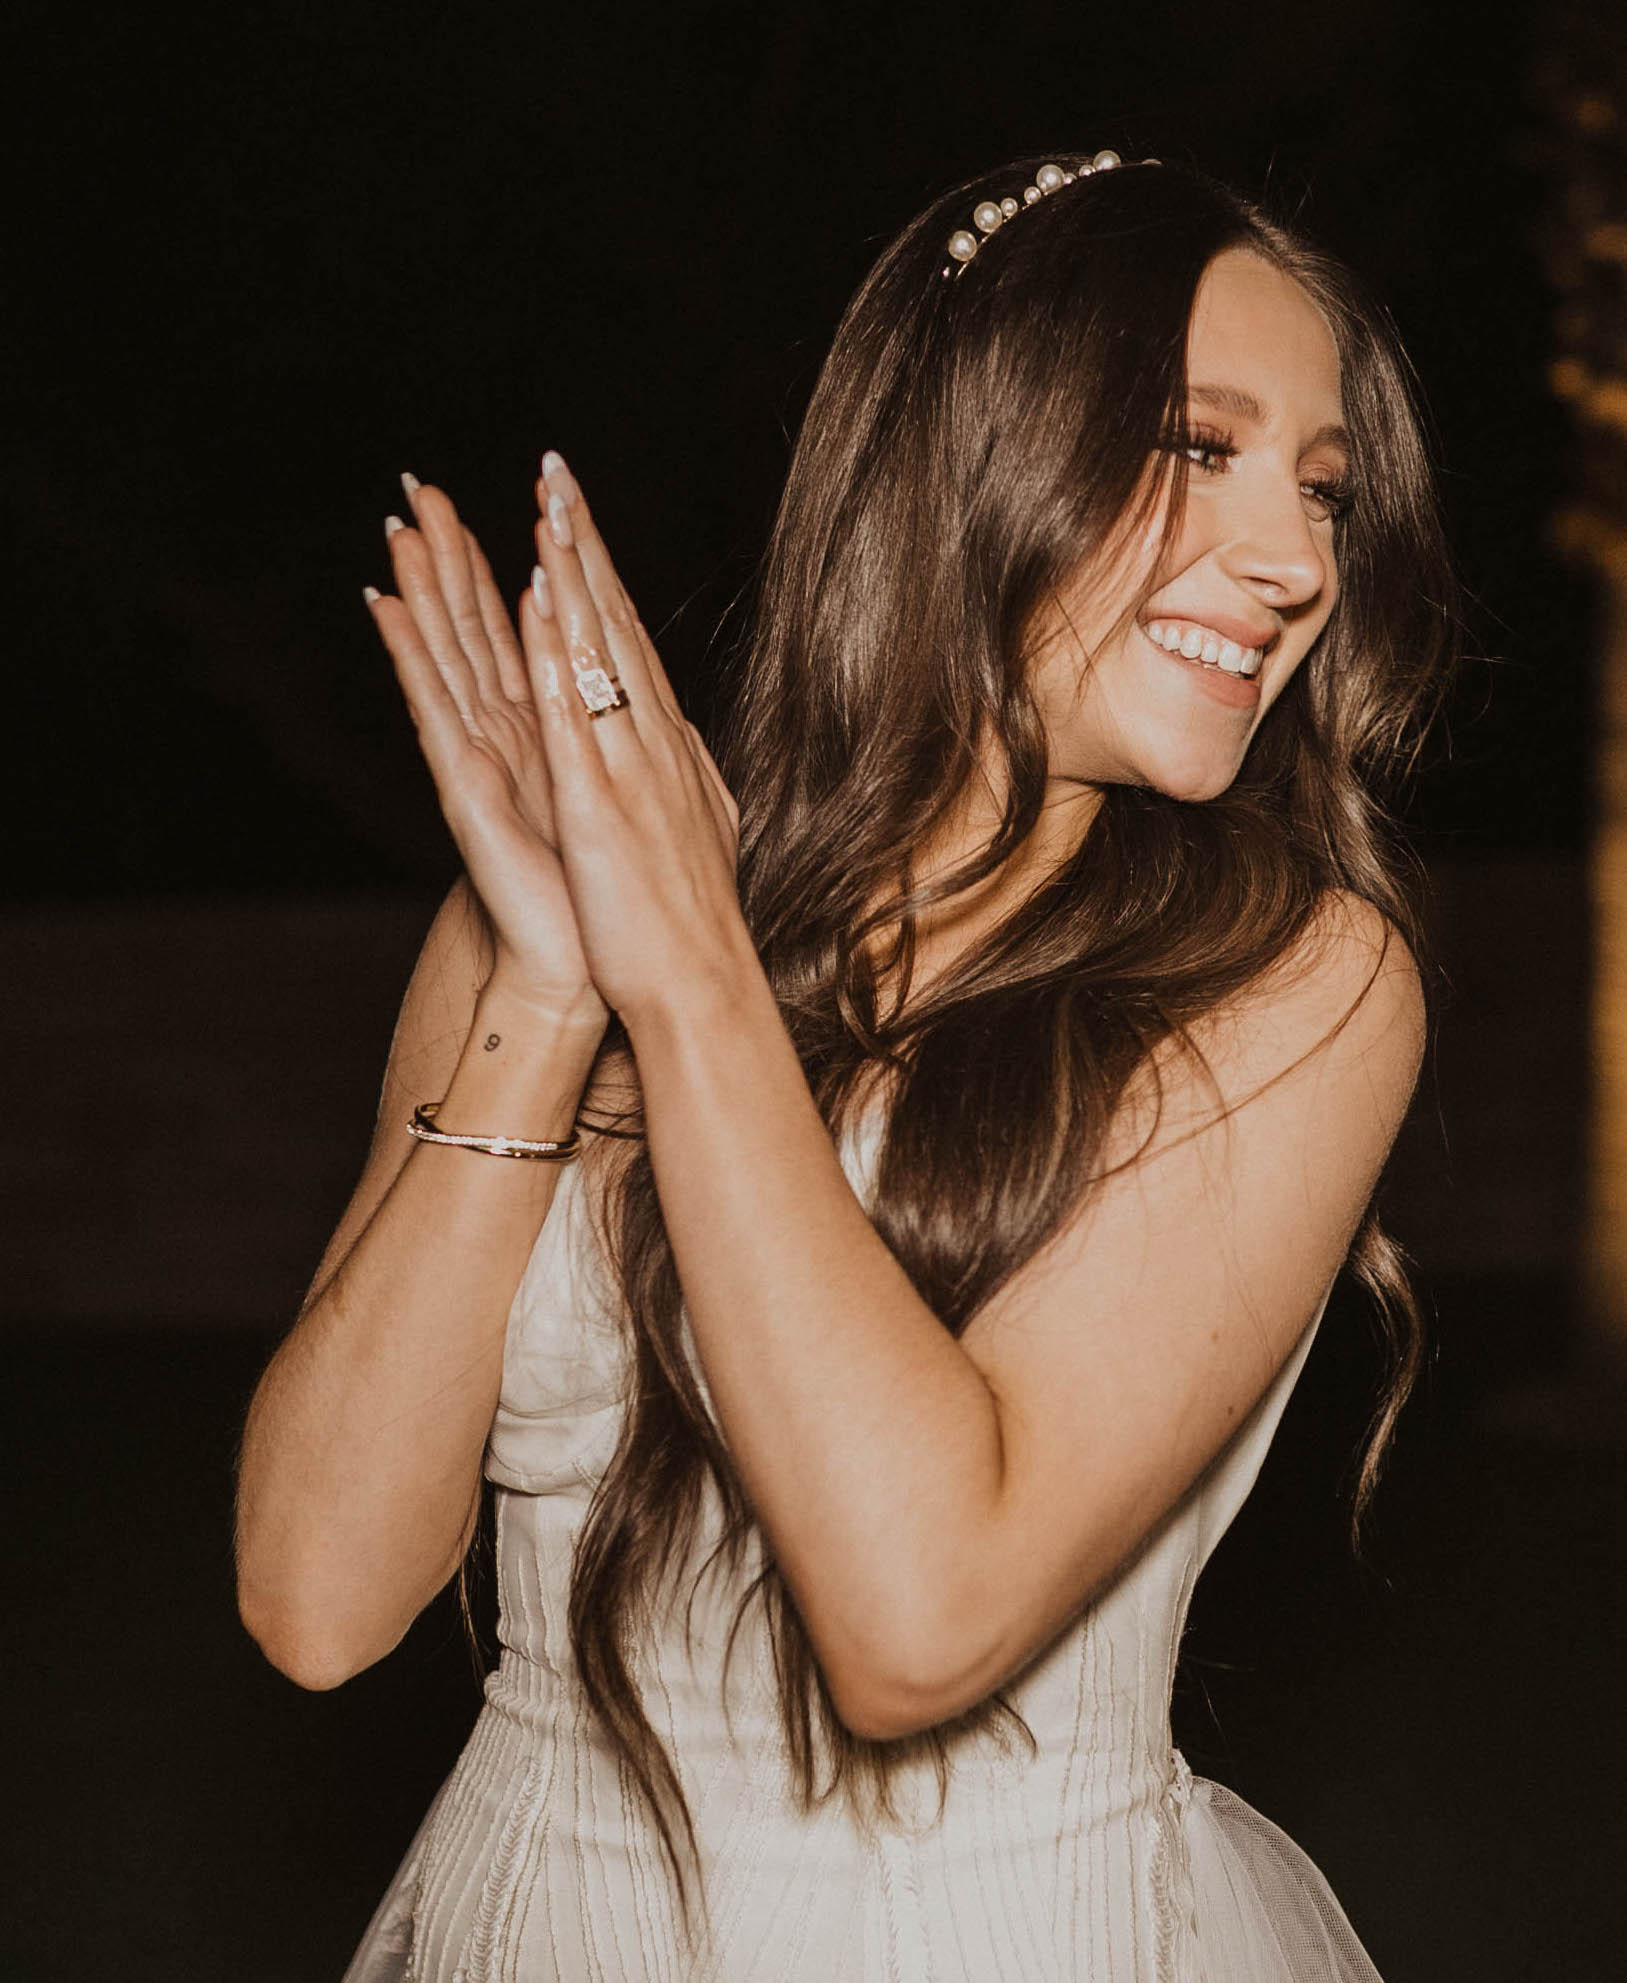 Riley, the owner of Caked Up With Riley, is smiling and dancing at her wedding reception in Arizona.